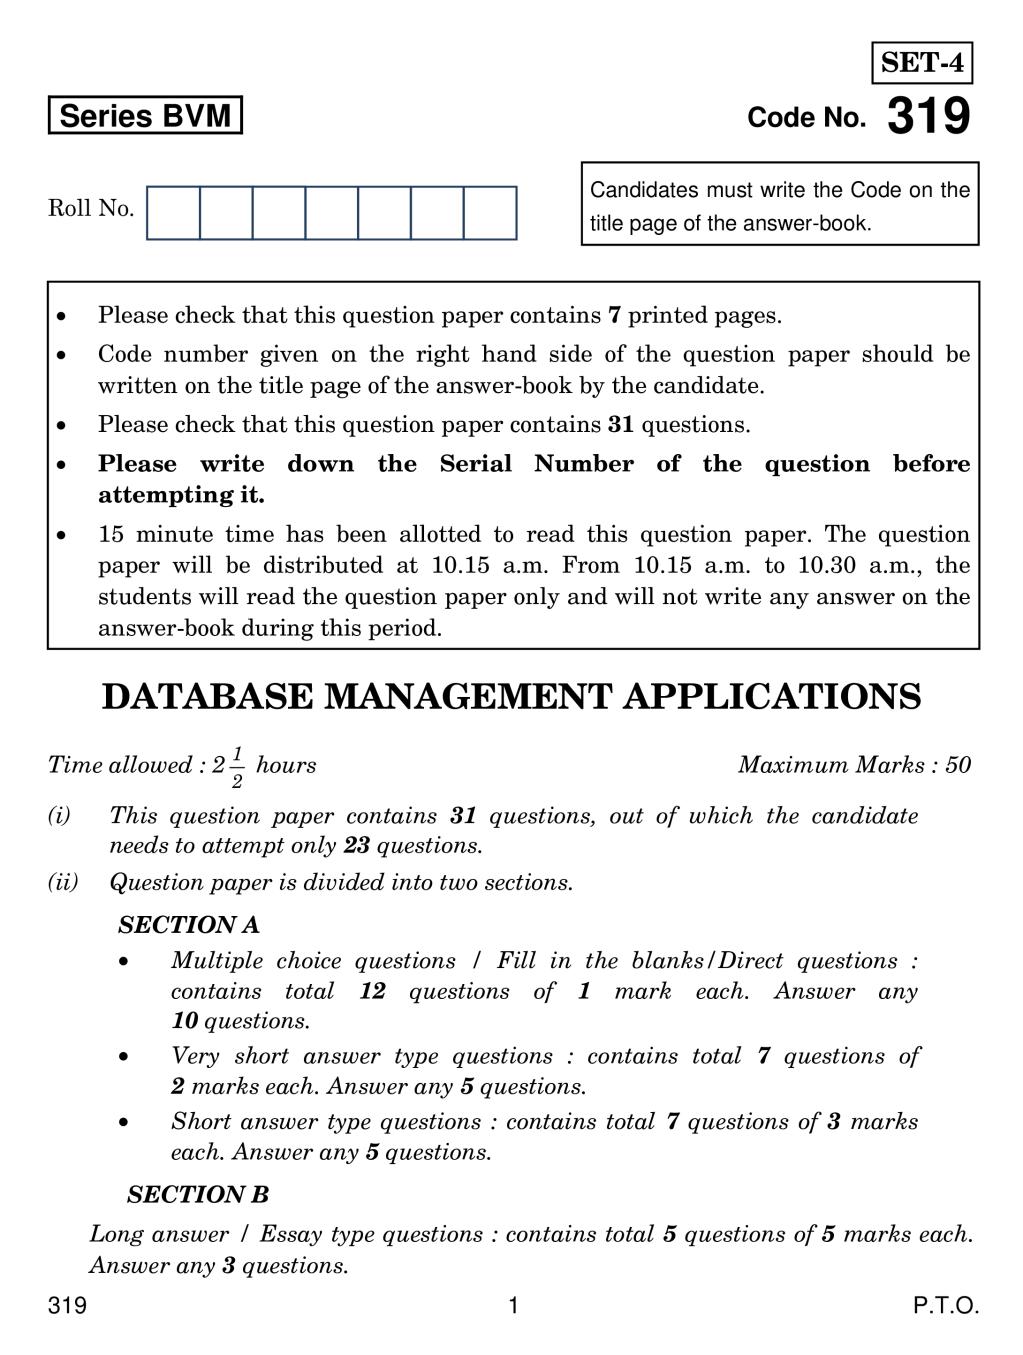 CBSE Class 12 Database Management Applications Question Paper 2019 - Page 1